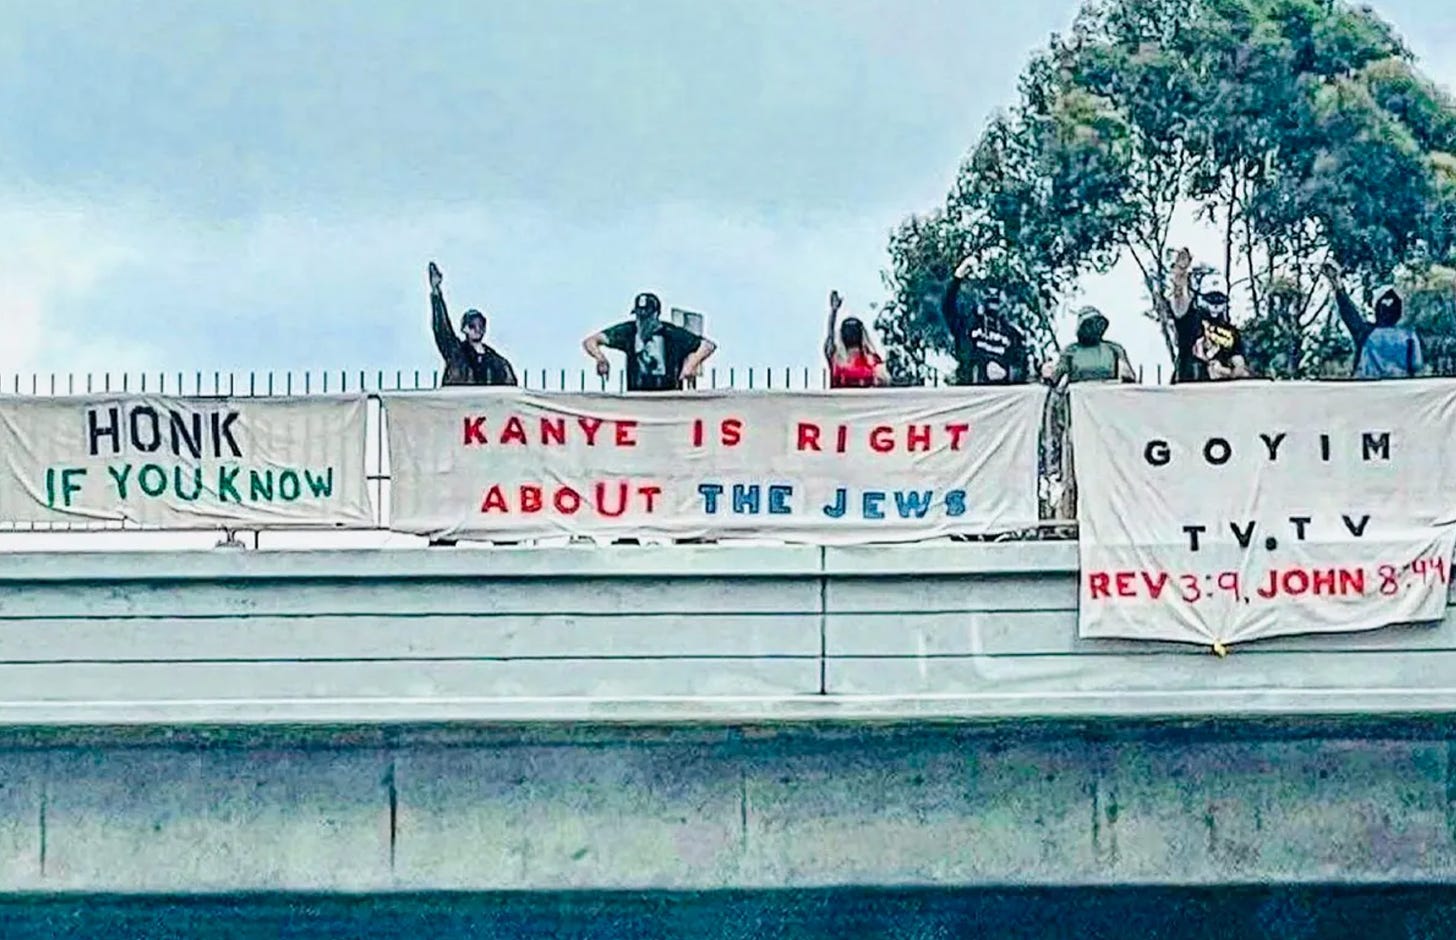 "Kanye is right about the jews" on a banner while peope give the heil hitler salute